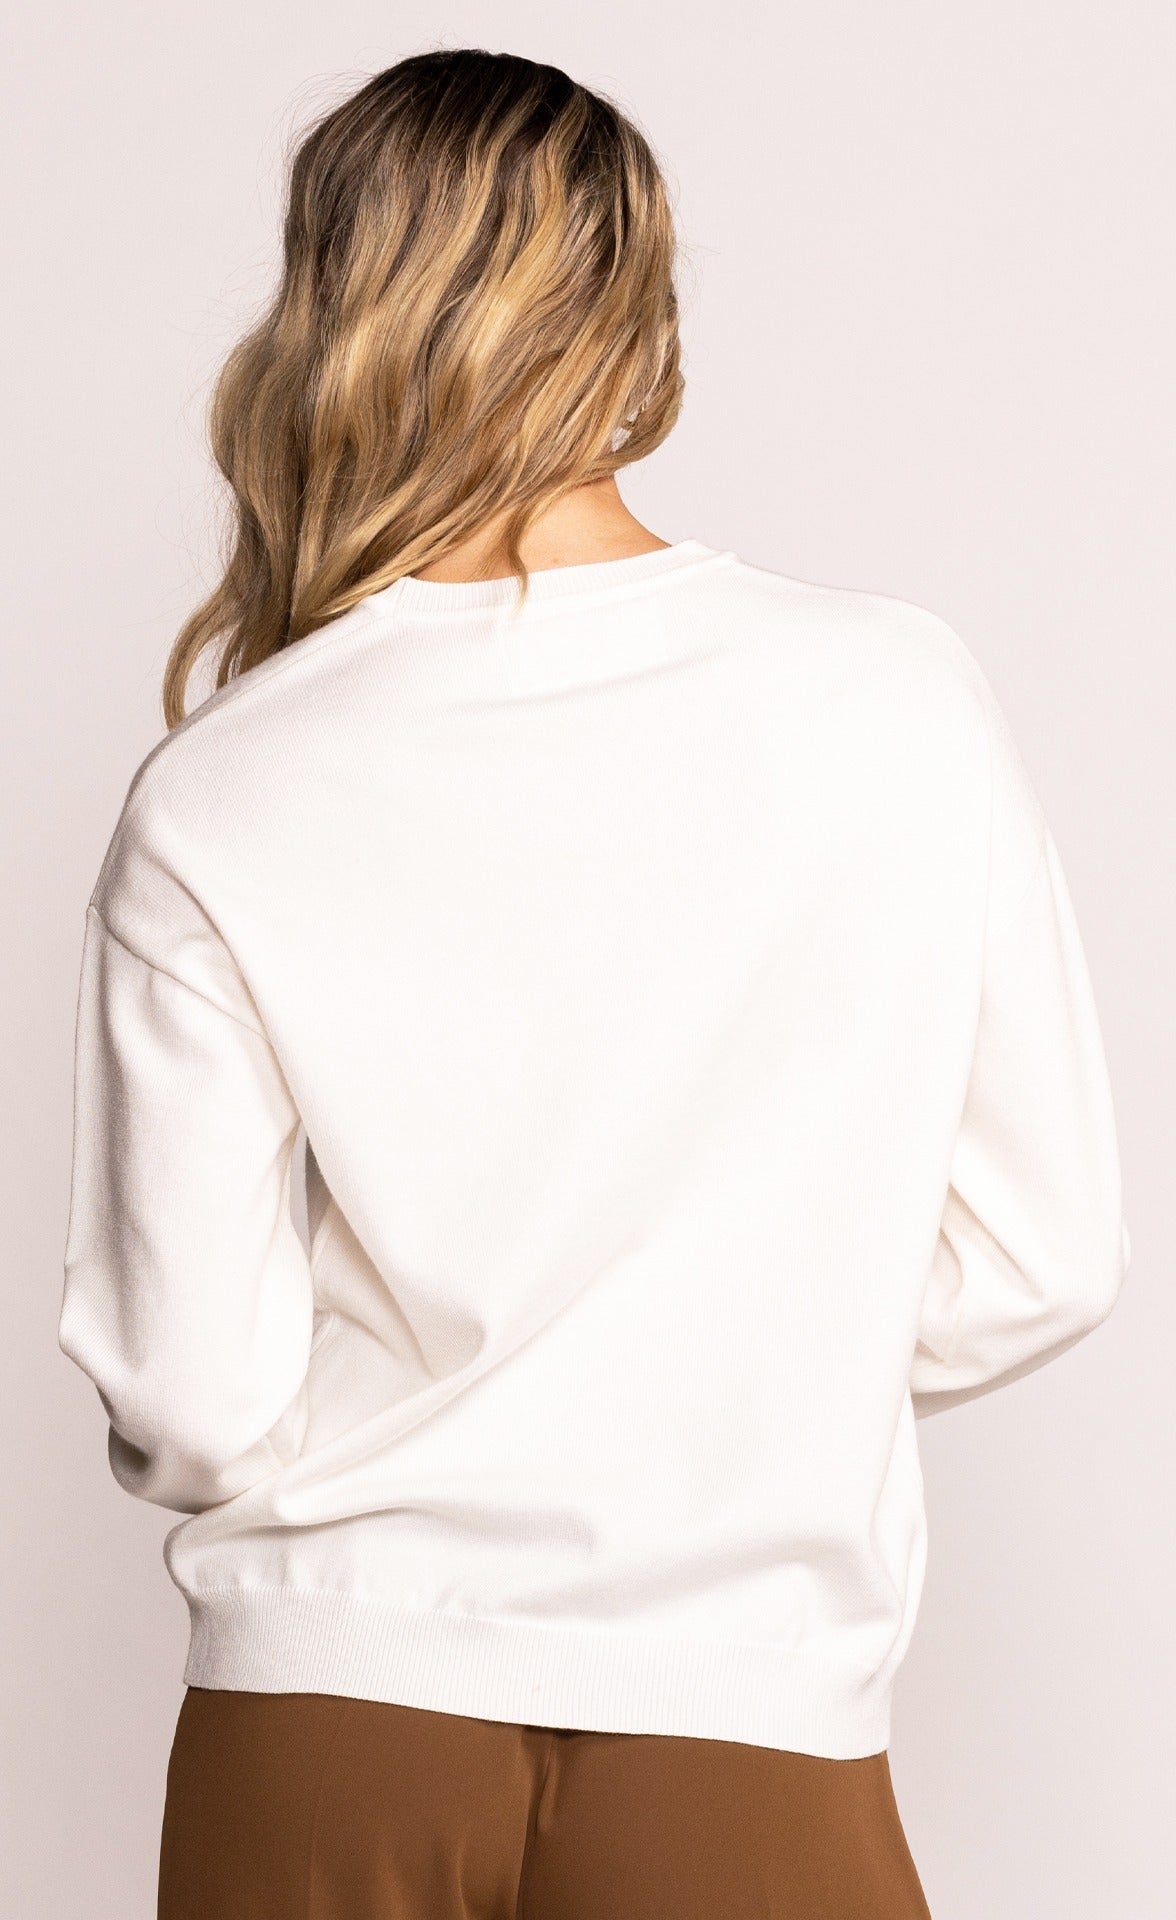 The Serenity Sweater